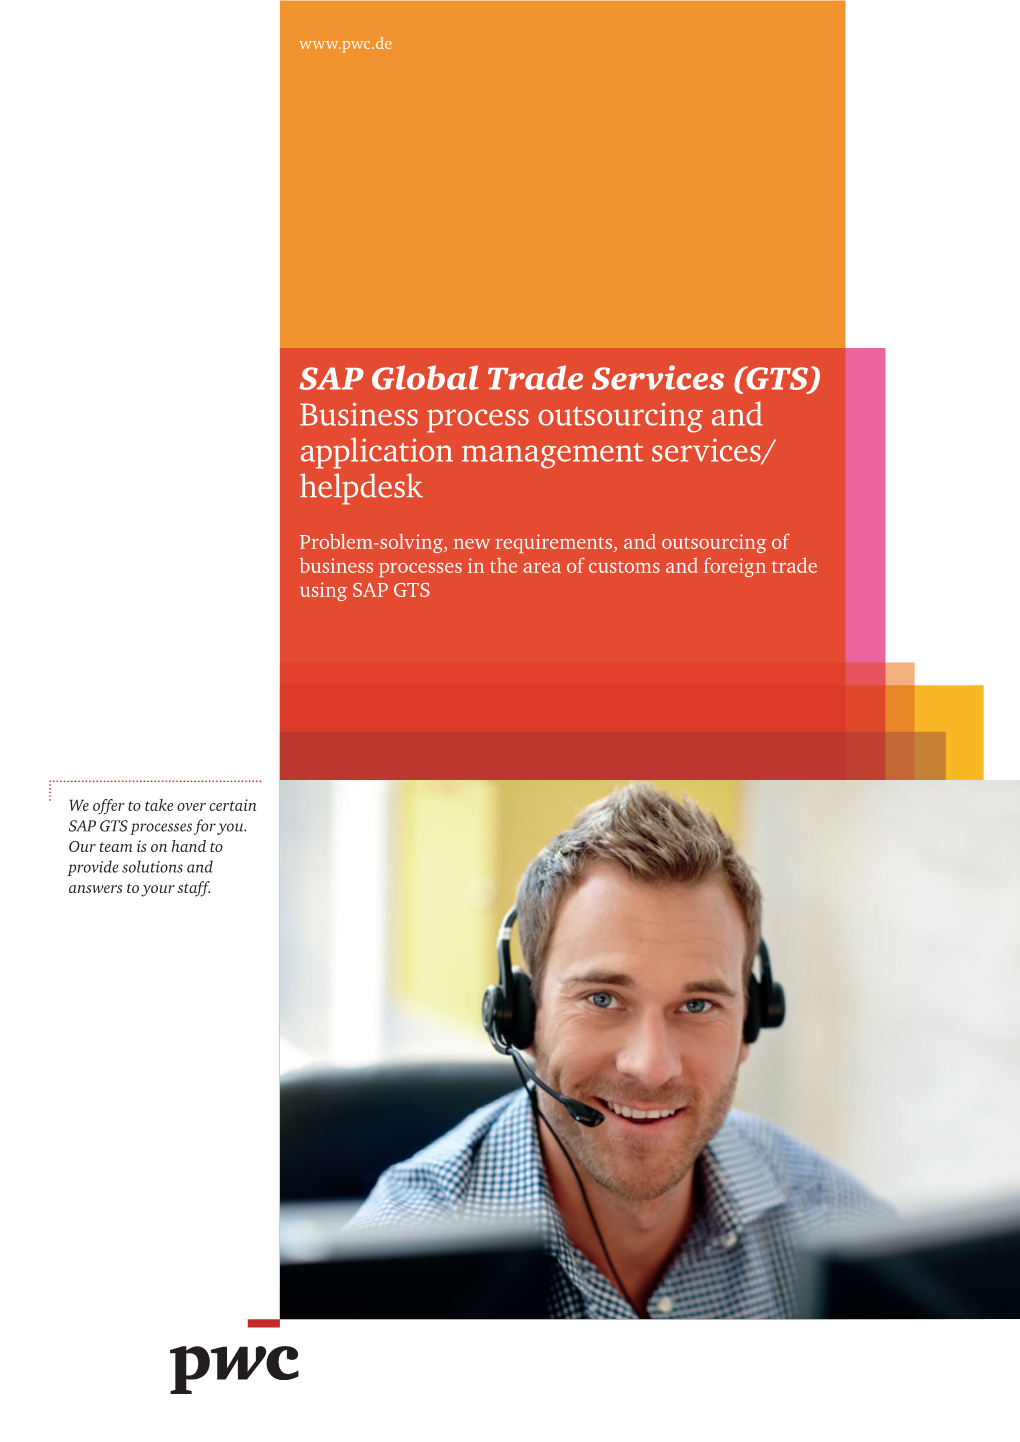 SAP Global Trade Services (GTS) Business Process Outsourcing and Application Management Services/ Helpdesk